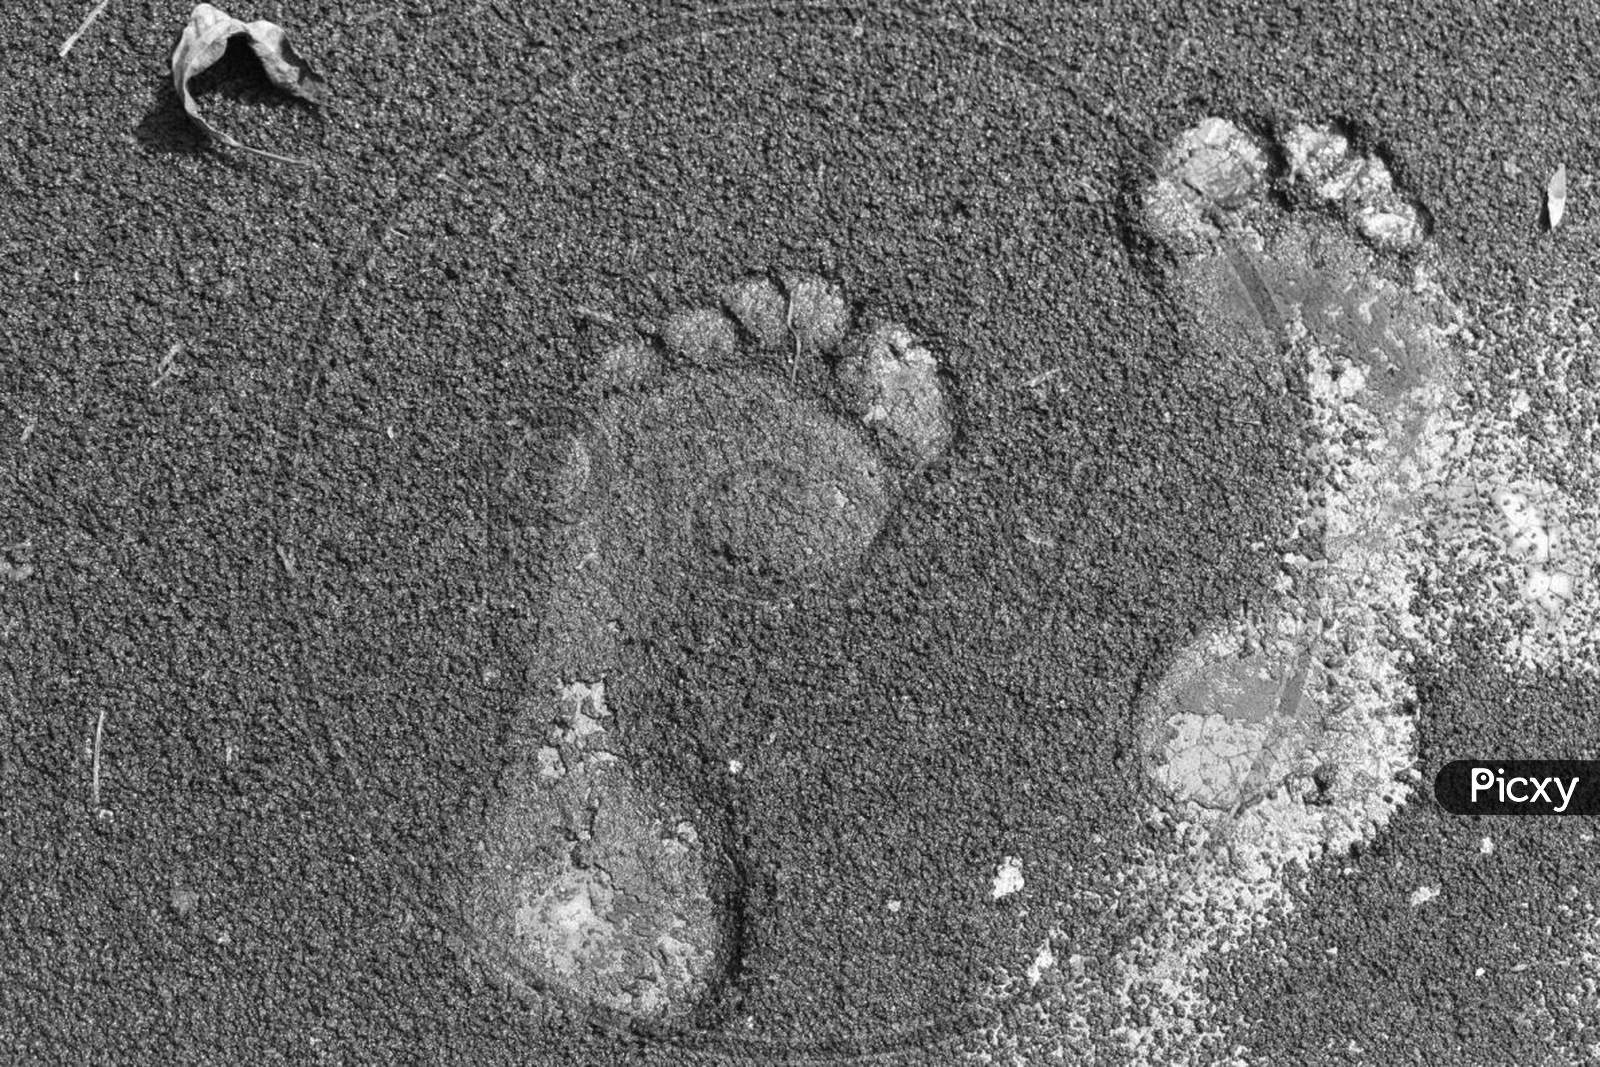 A beautiful Black and white foot print